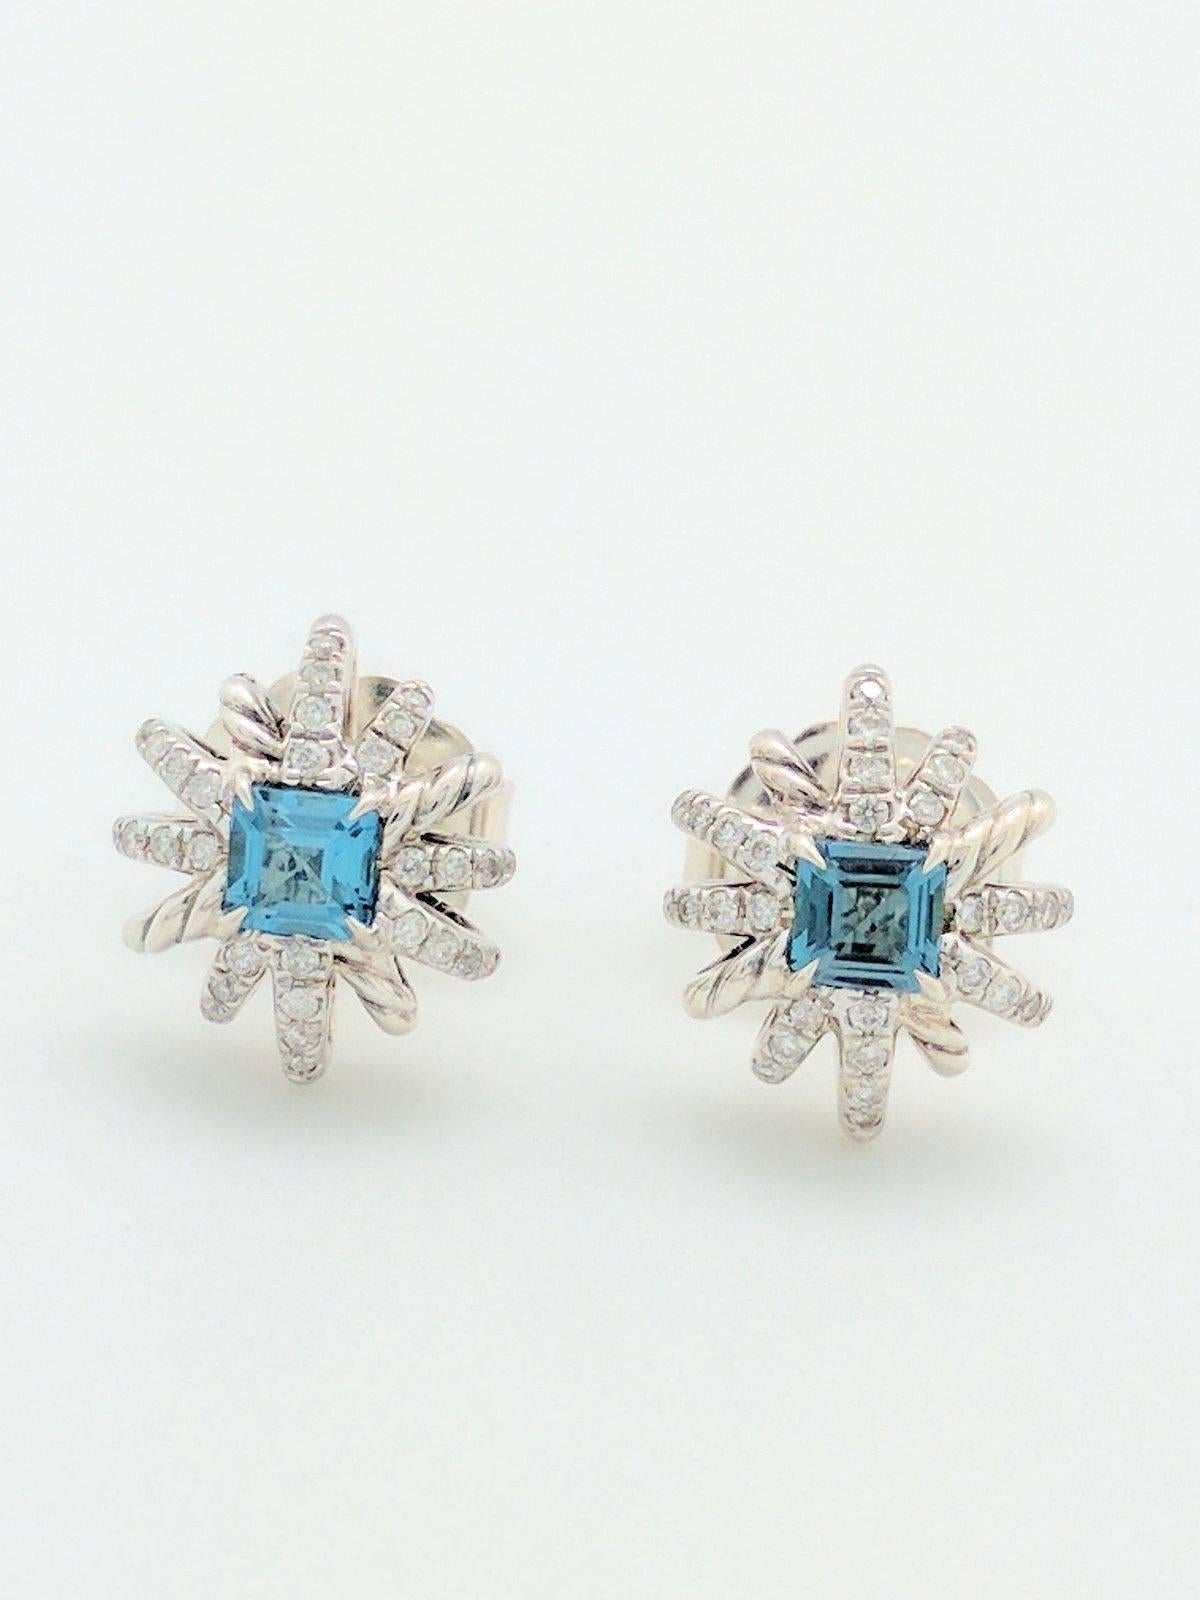 Authentic David Yurman Sterling Silver Starburst Earrings with Hampton Blue Topaz & Diamonds, 12mm

You are viewing a beautiful pair of David Yurman starburst earrings with Hampton blue topaz and pave diamonds from the Starburst Collection.

These